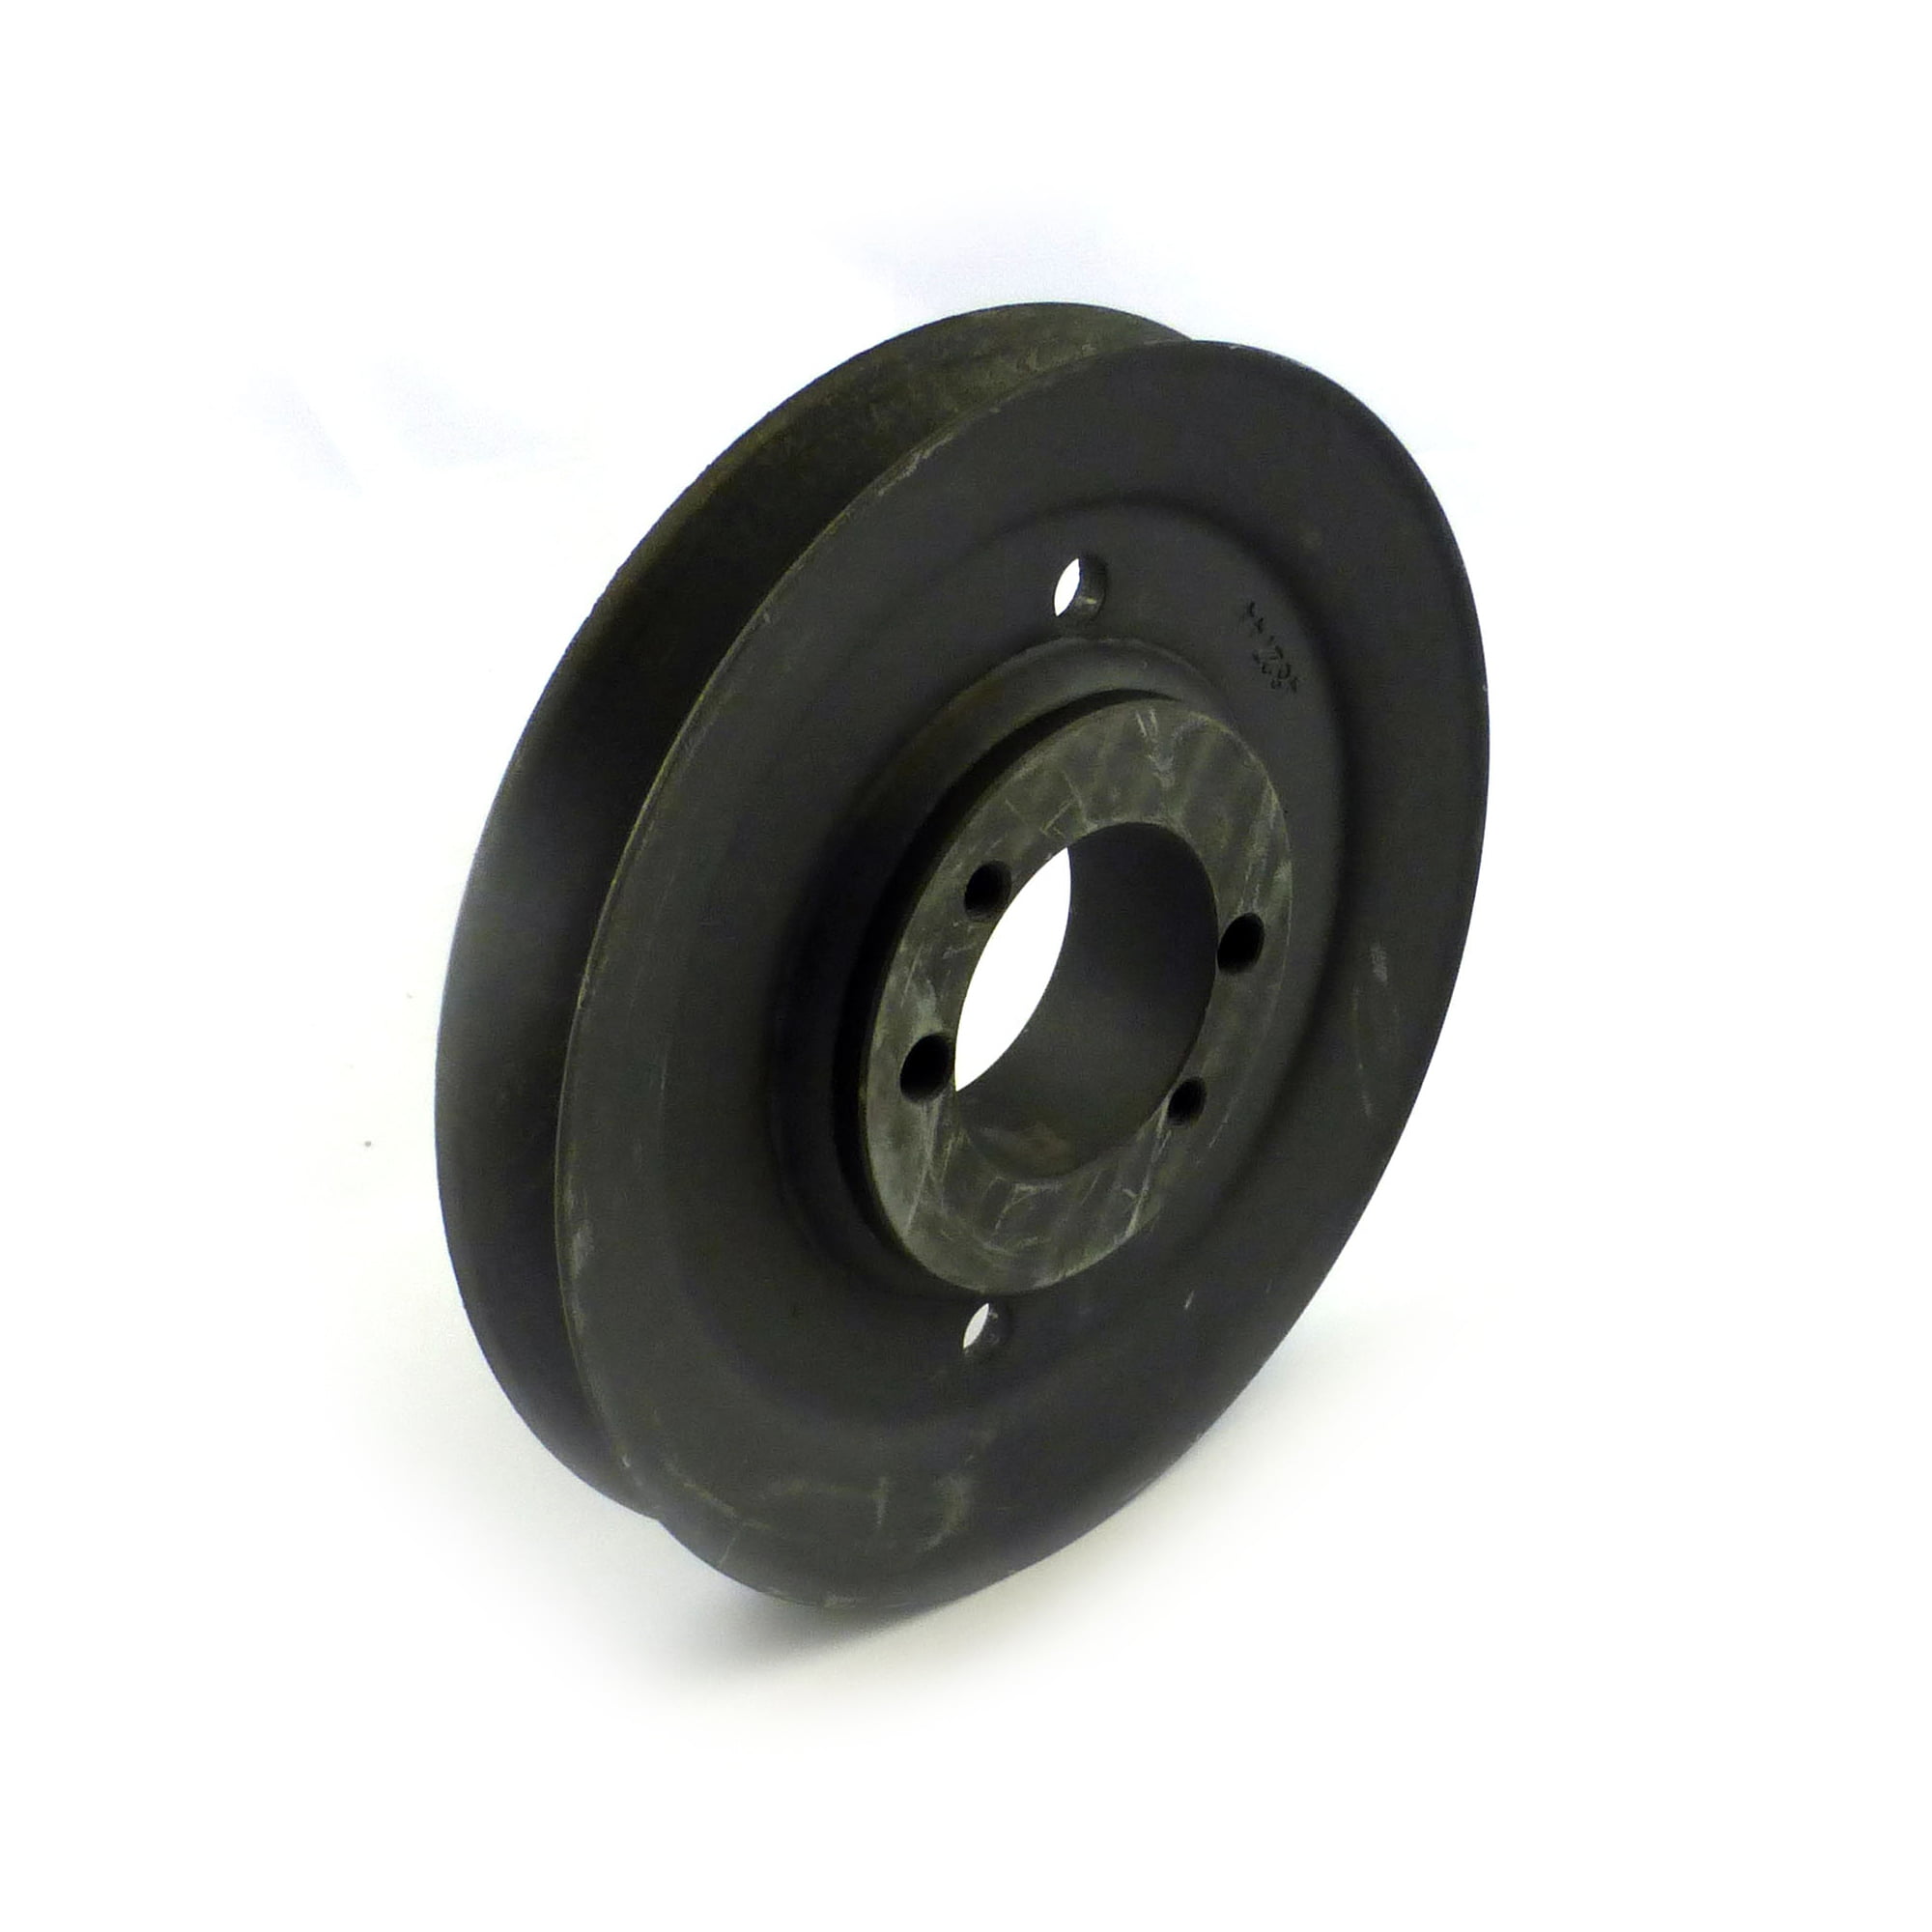 Scag Taper Bore Pulley for Lawn Mowers SM-61V SM-61A SM-72A / S482744